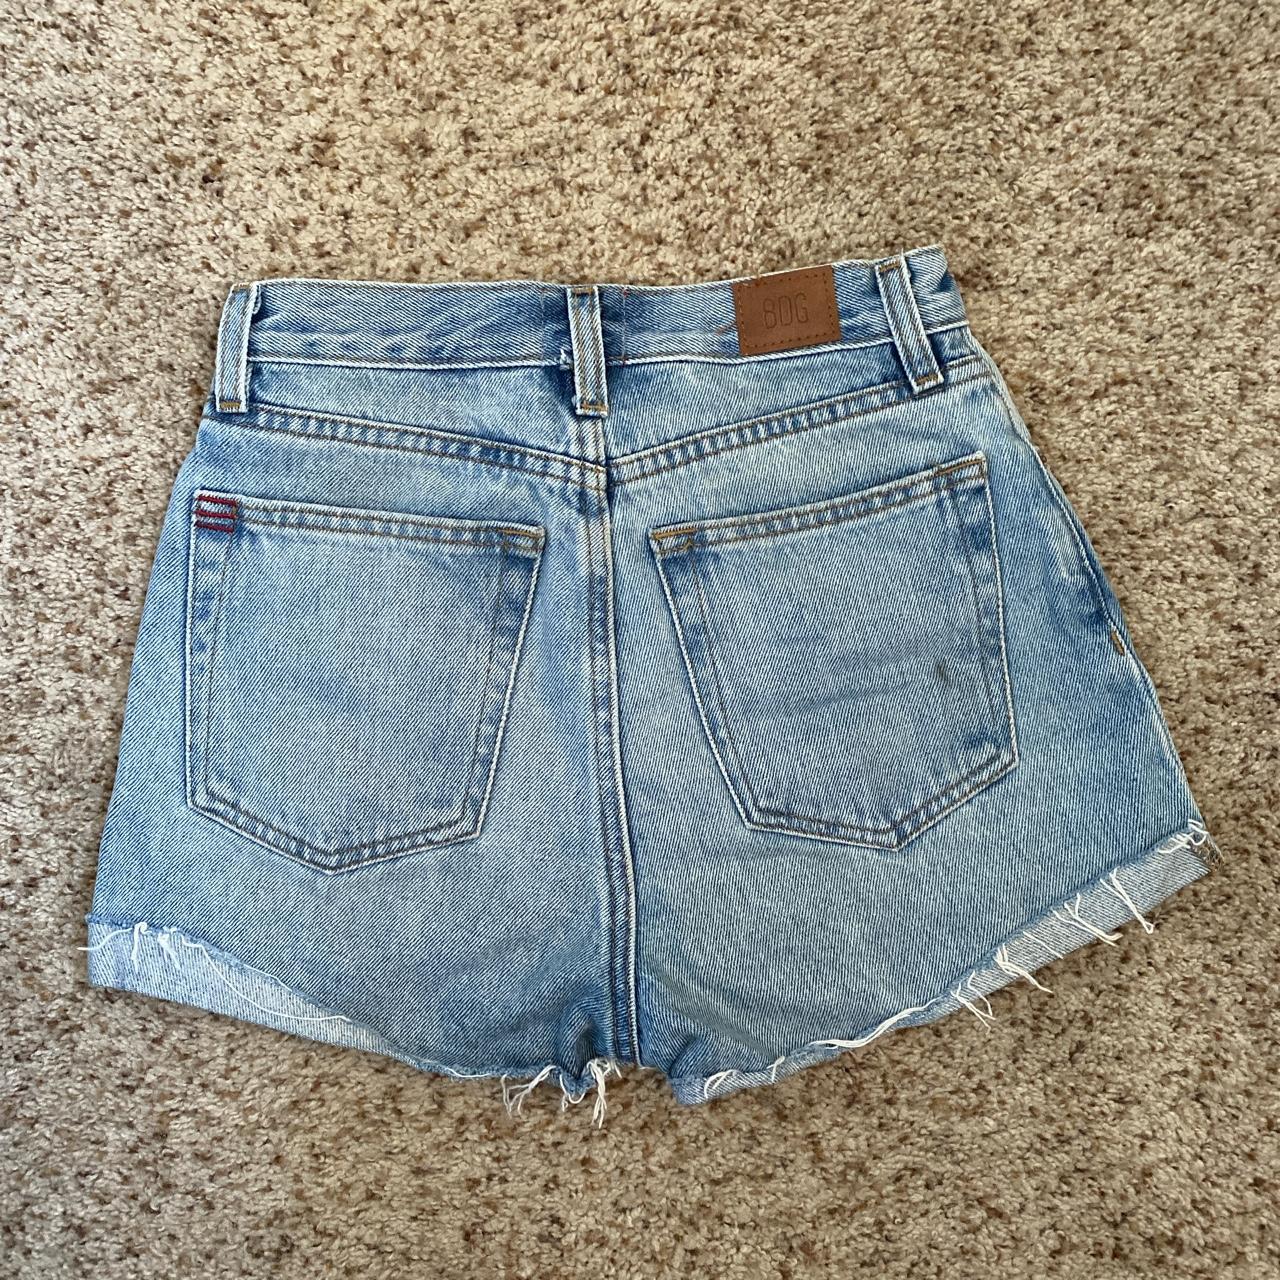 FREE SHIPPING ON THIS ITEM urban outfitters denim... - Depop